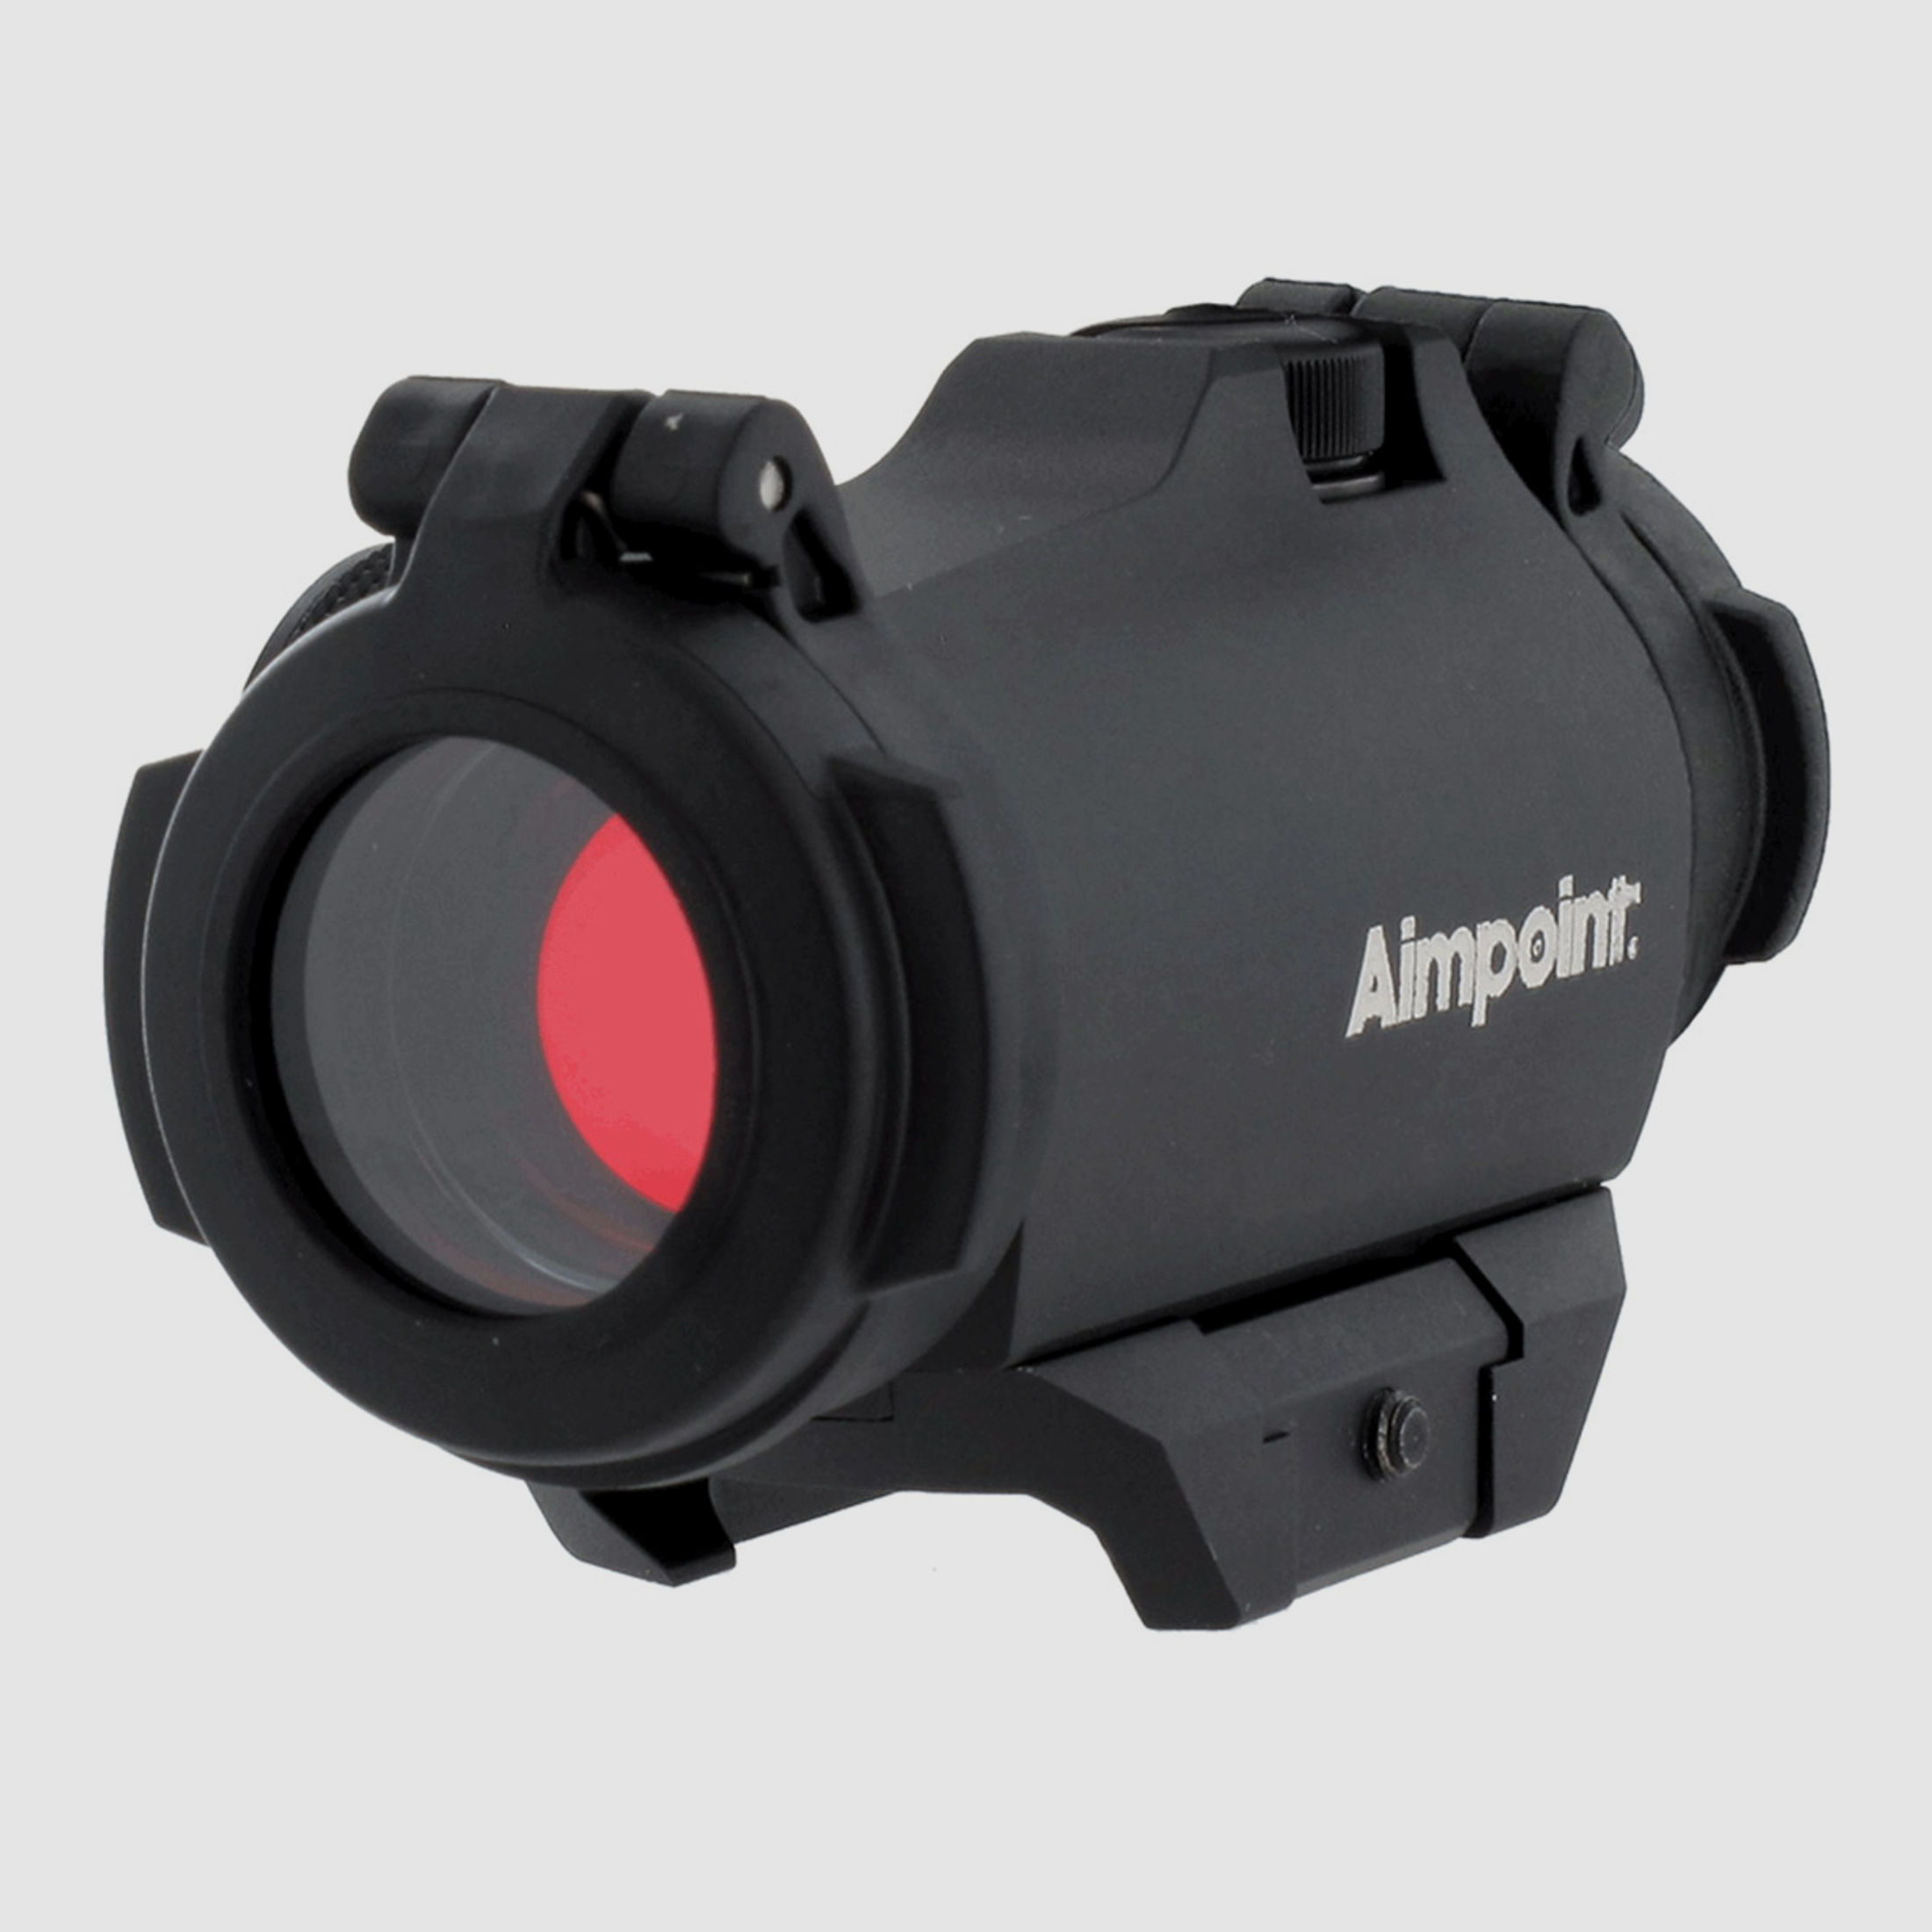 Aimpoint Micro H2  2 MOA mit Adapter 39mm für Weaver / Picatinny